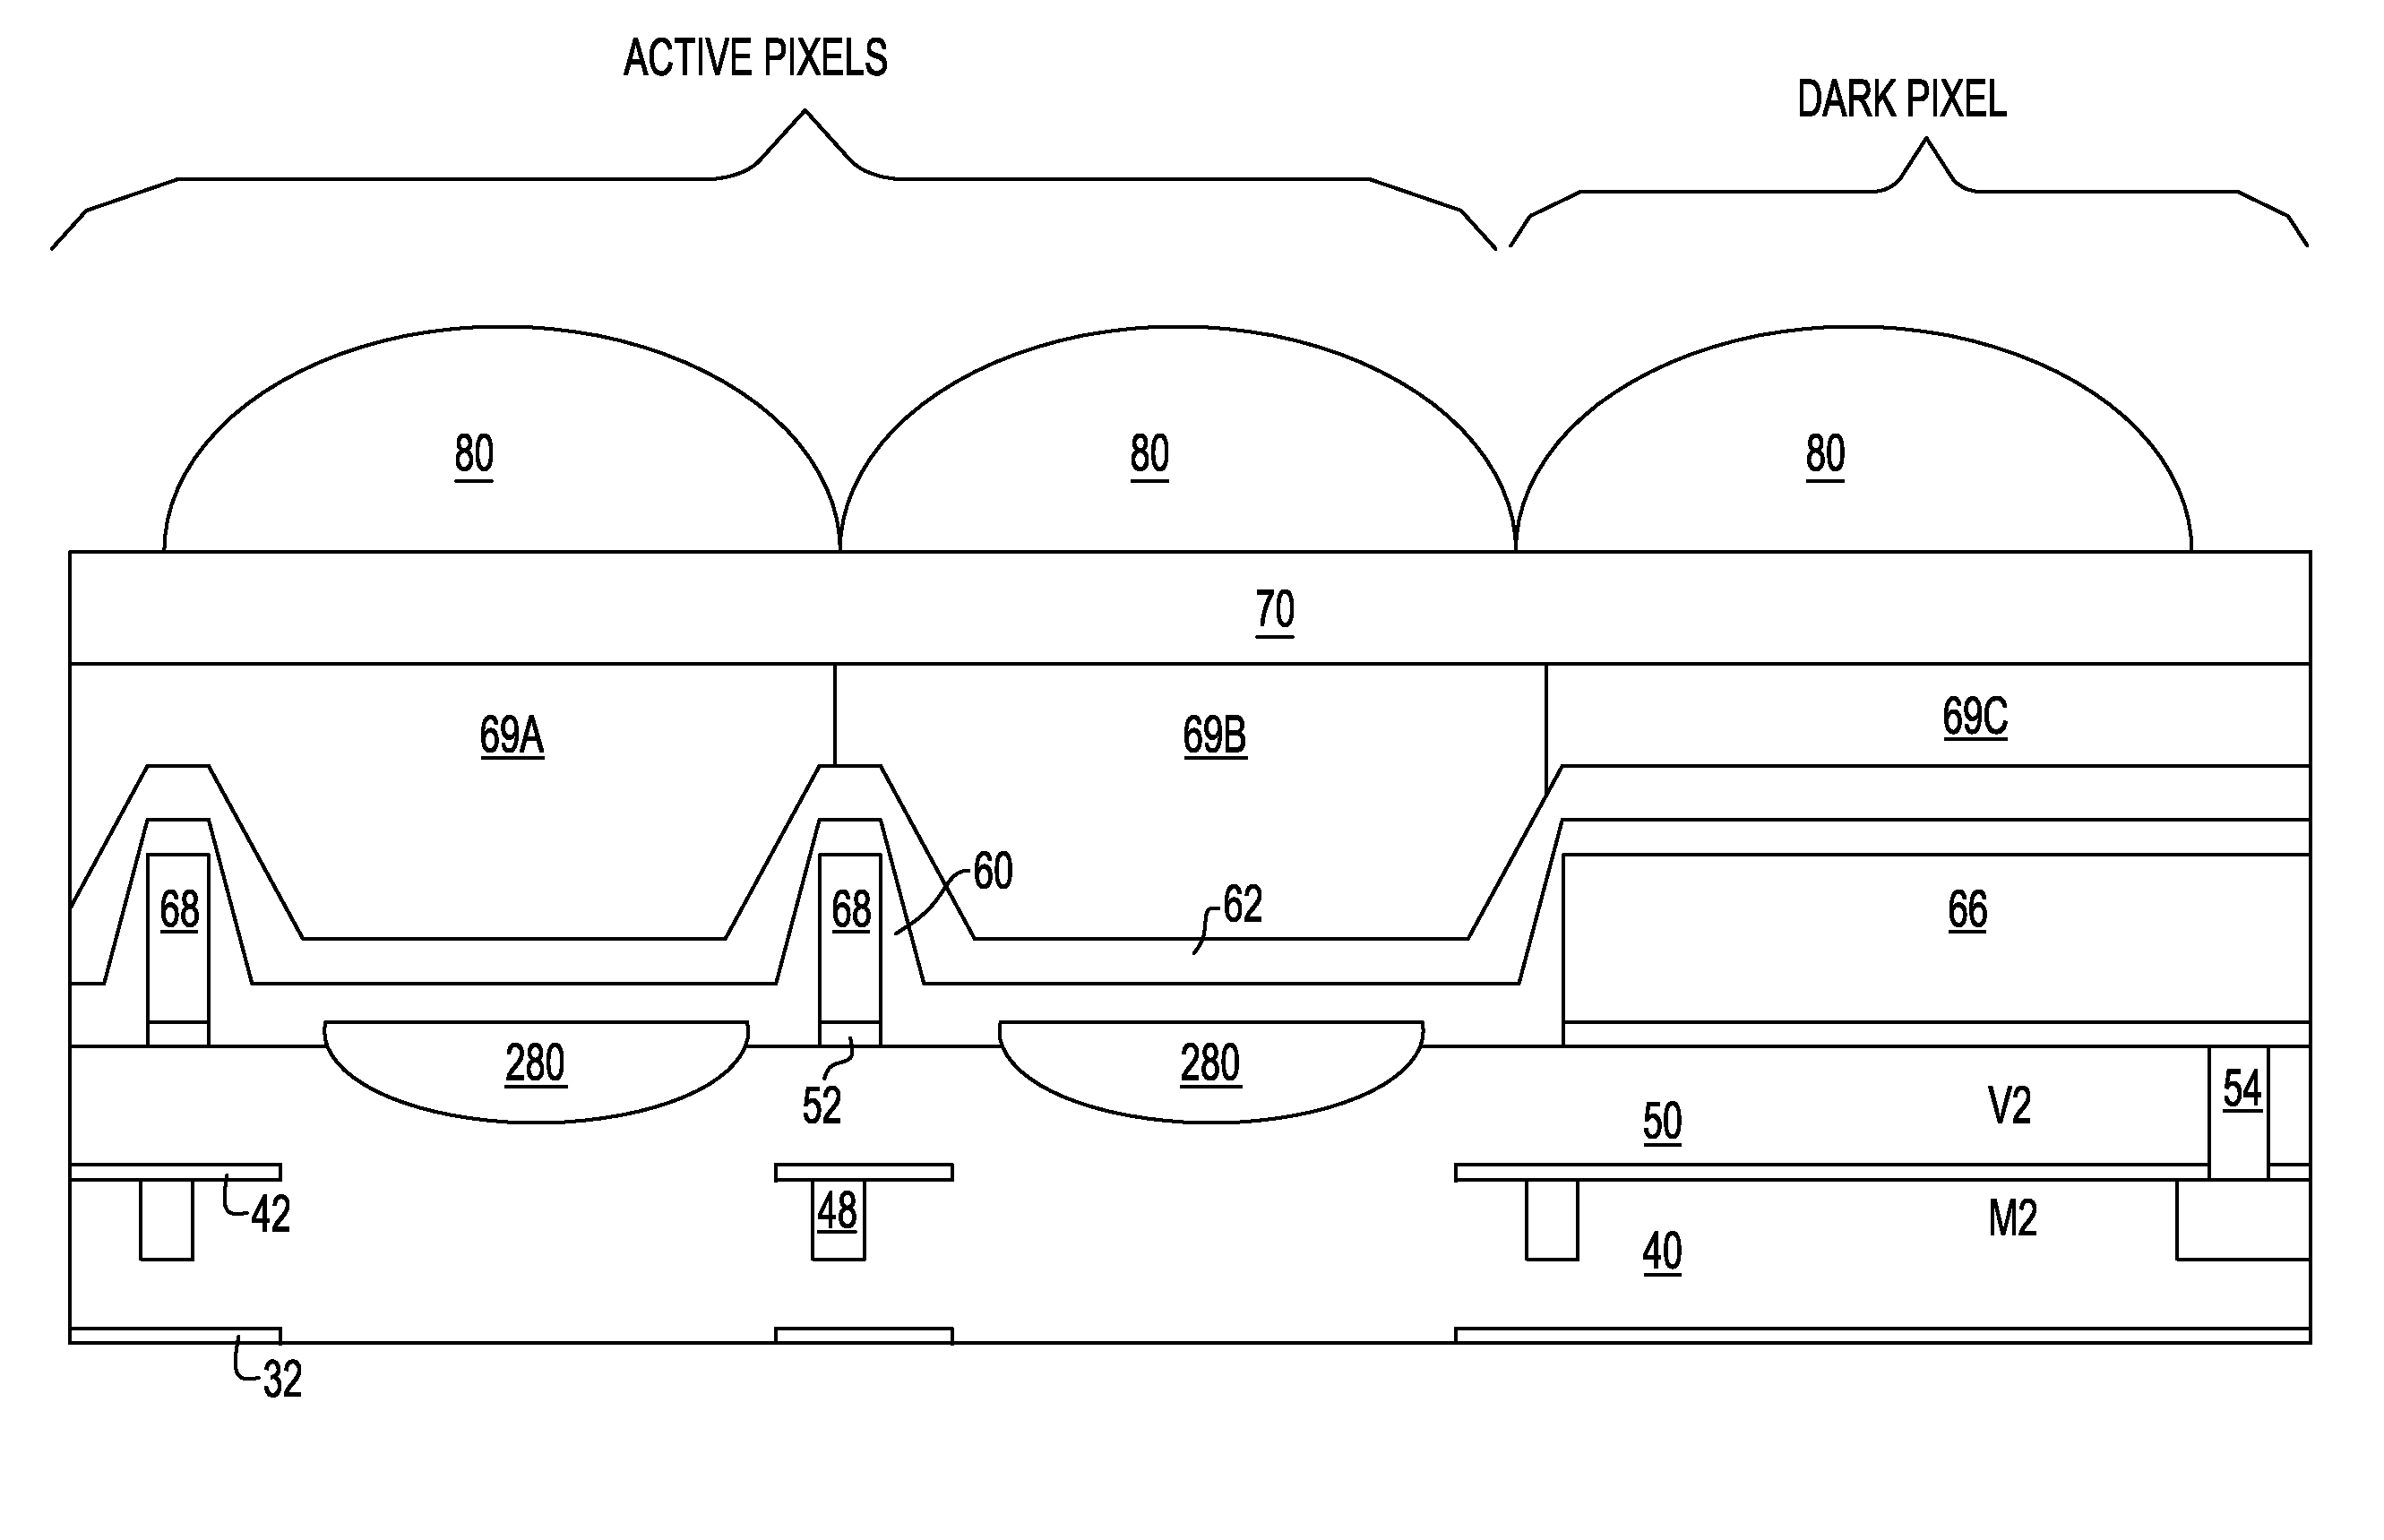 Method of forming an inverted lens in a semiconductor structure